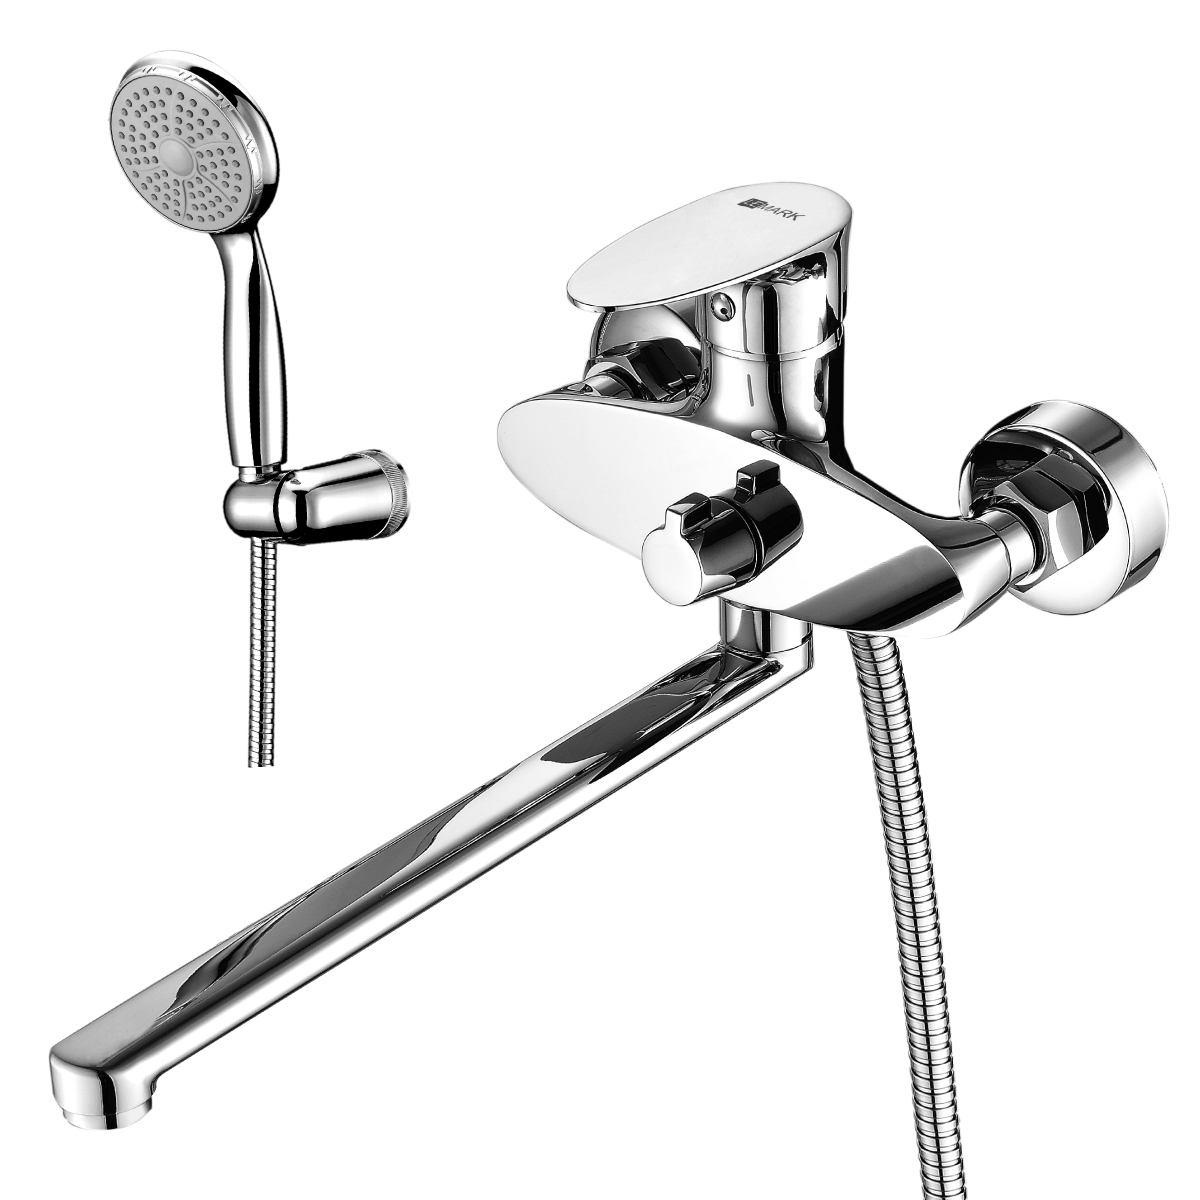 LM0251C Washbasin/bath faucet
with 300 mm at swivel spout